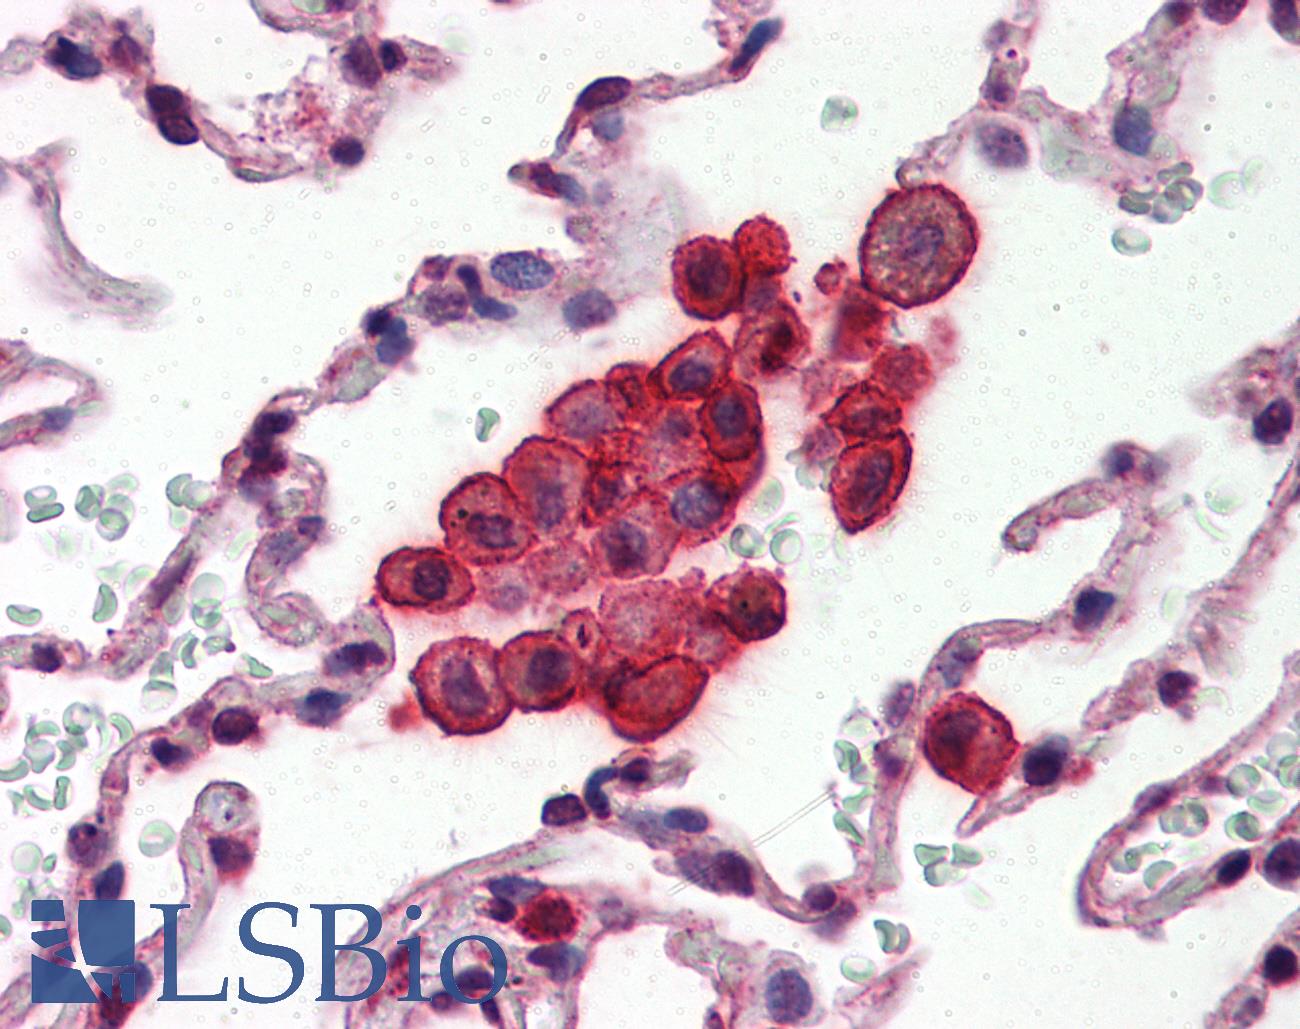 CLU / Clusterin Antibody - Anti-Clusterin antibody IHC of human lung. Immunohistochemistry of formalin-fixed, paraffin-embedded tissue after heat-induced antigen retrieval. Antibody concentration 10 ug/ml.